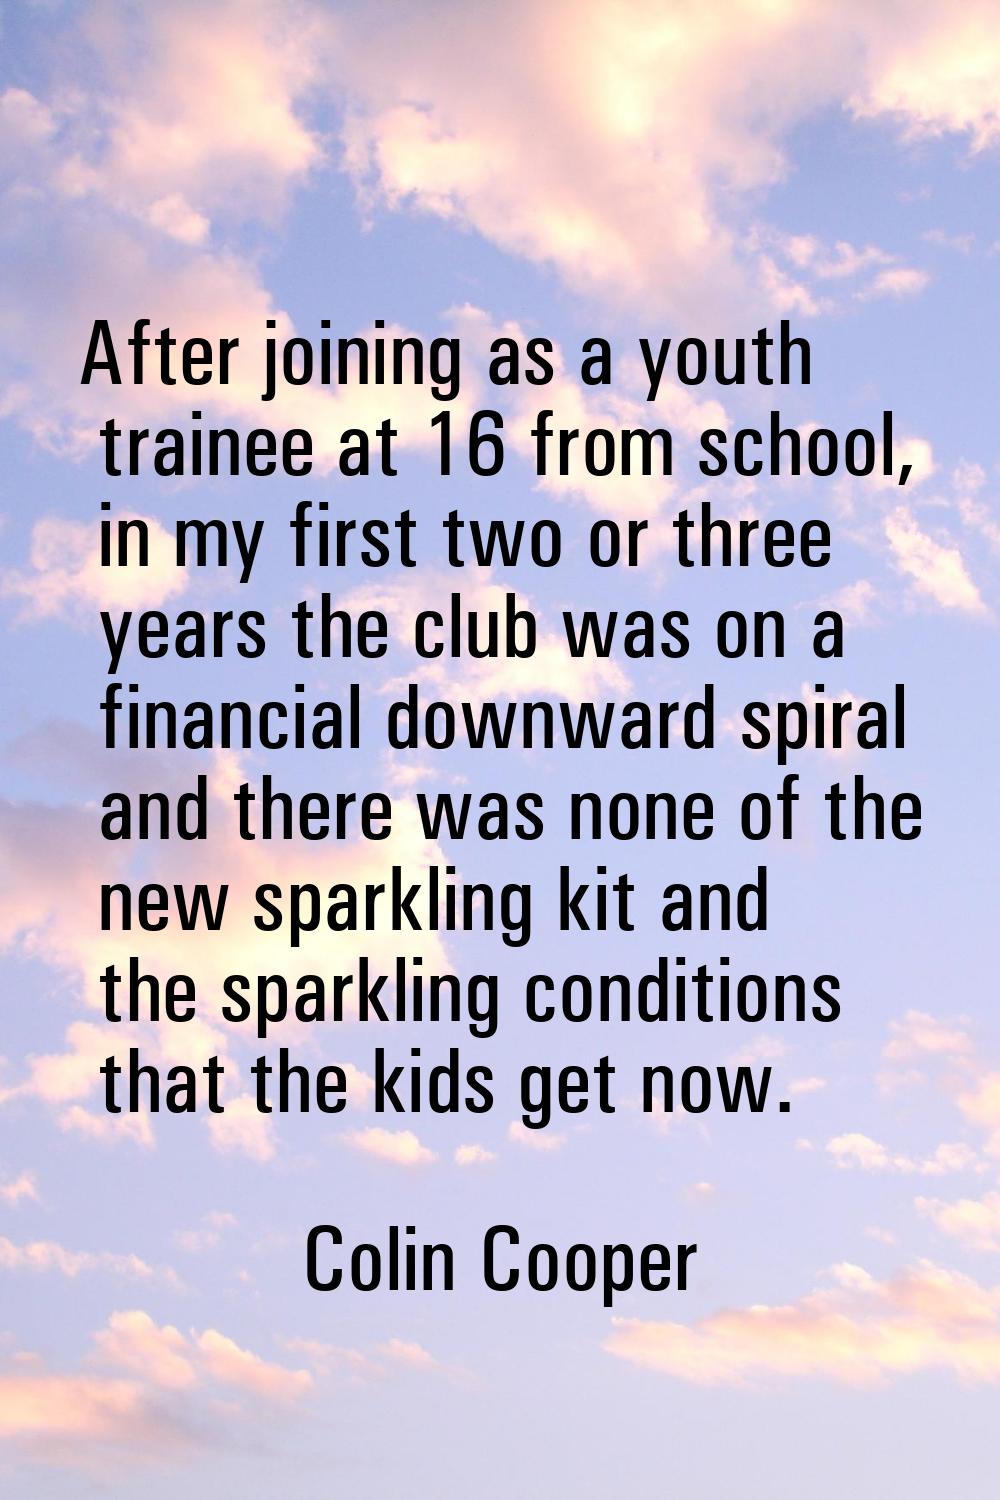 After joining as a youth trainee at 16 from school, in my first two or three years the club was on 